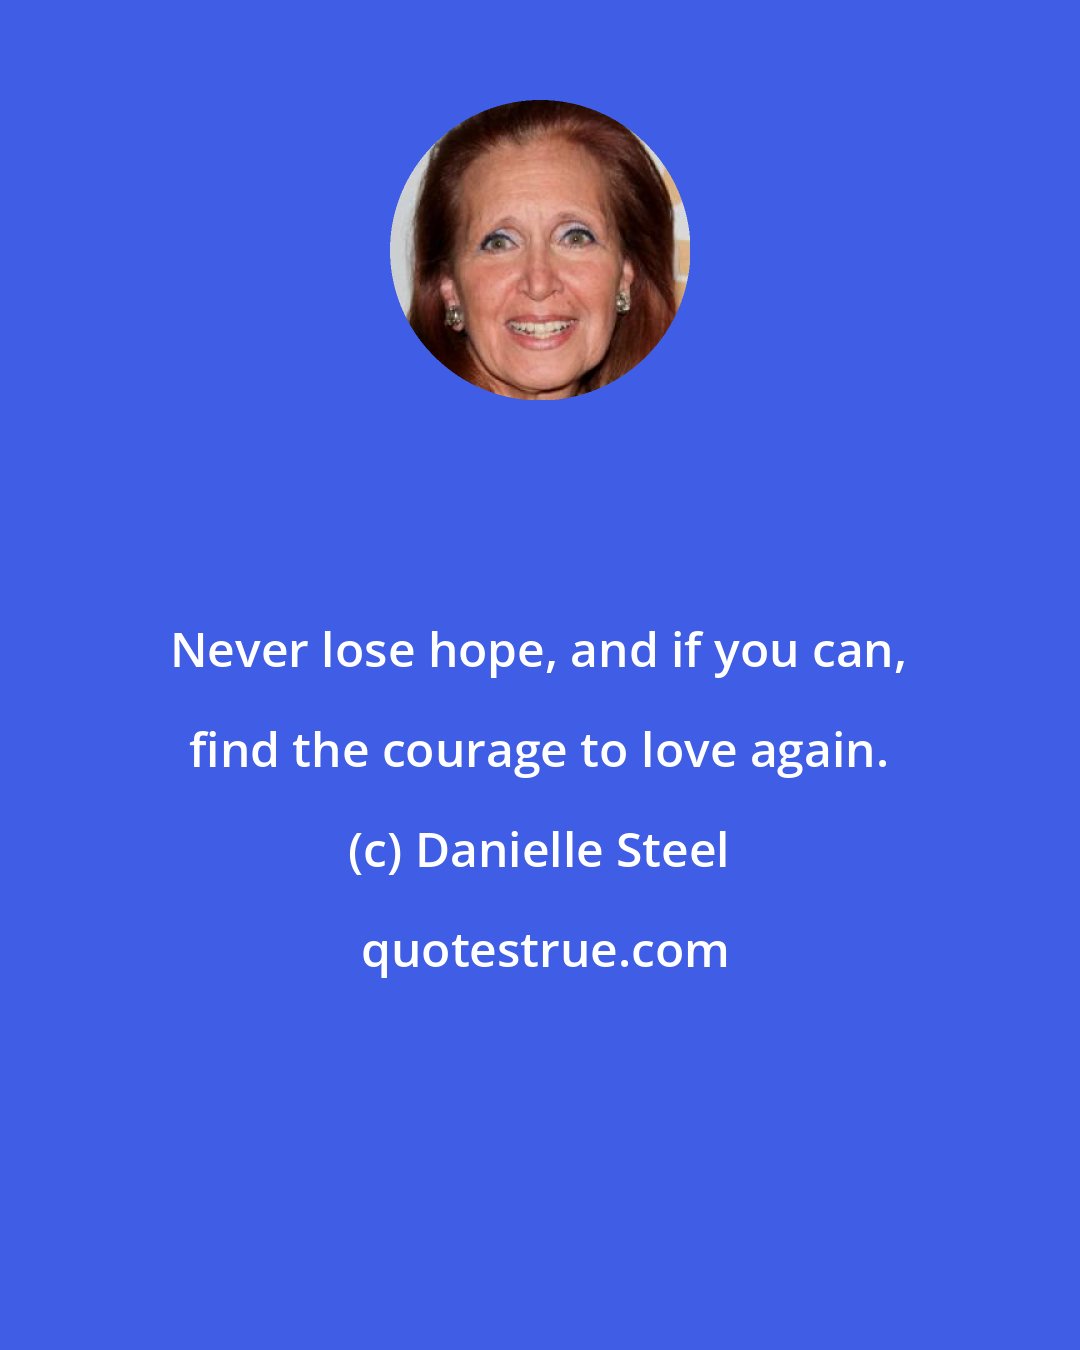 Danielle Steel: Never lose hope, and if you can, find the courage to love again.